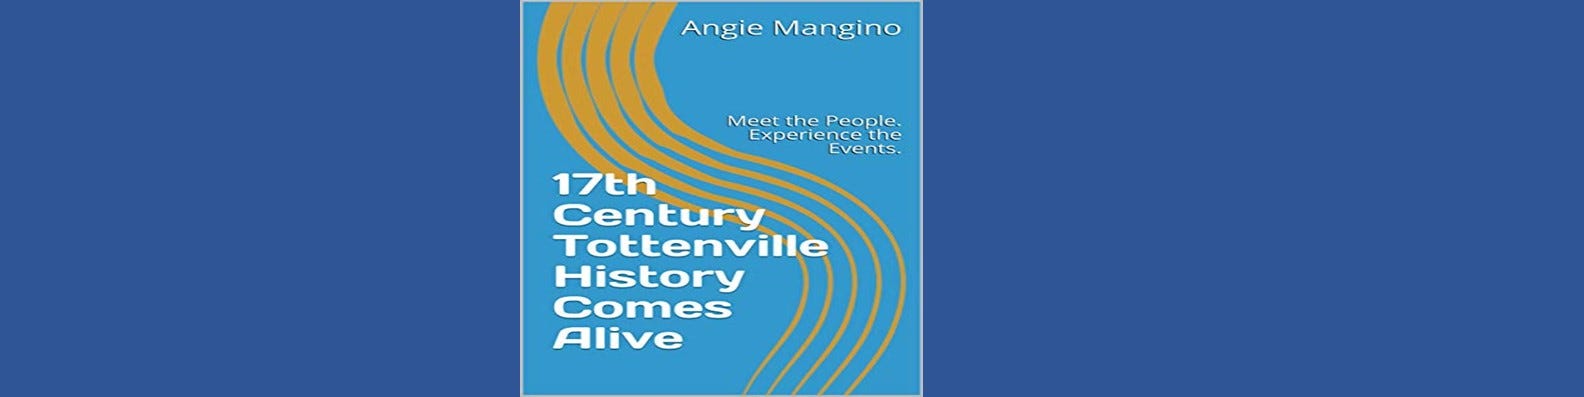 Blue book cover with gold swirls coming down to title 17th Century Tottenville History Comes Alive. Meet the People. Experience the Events.